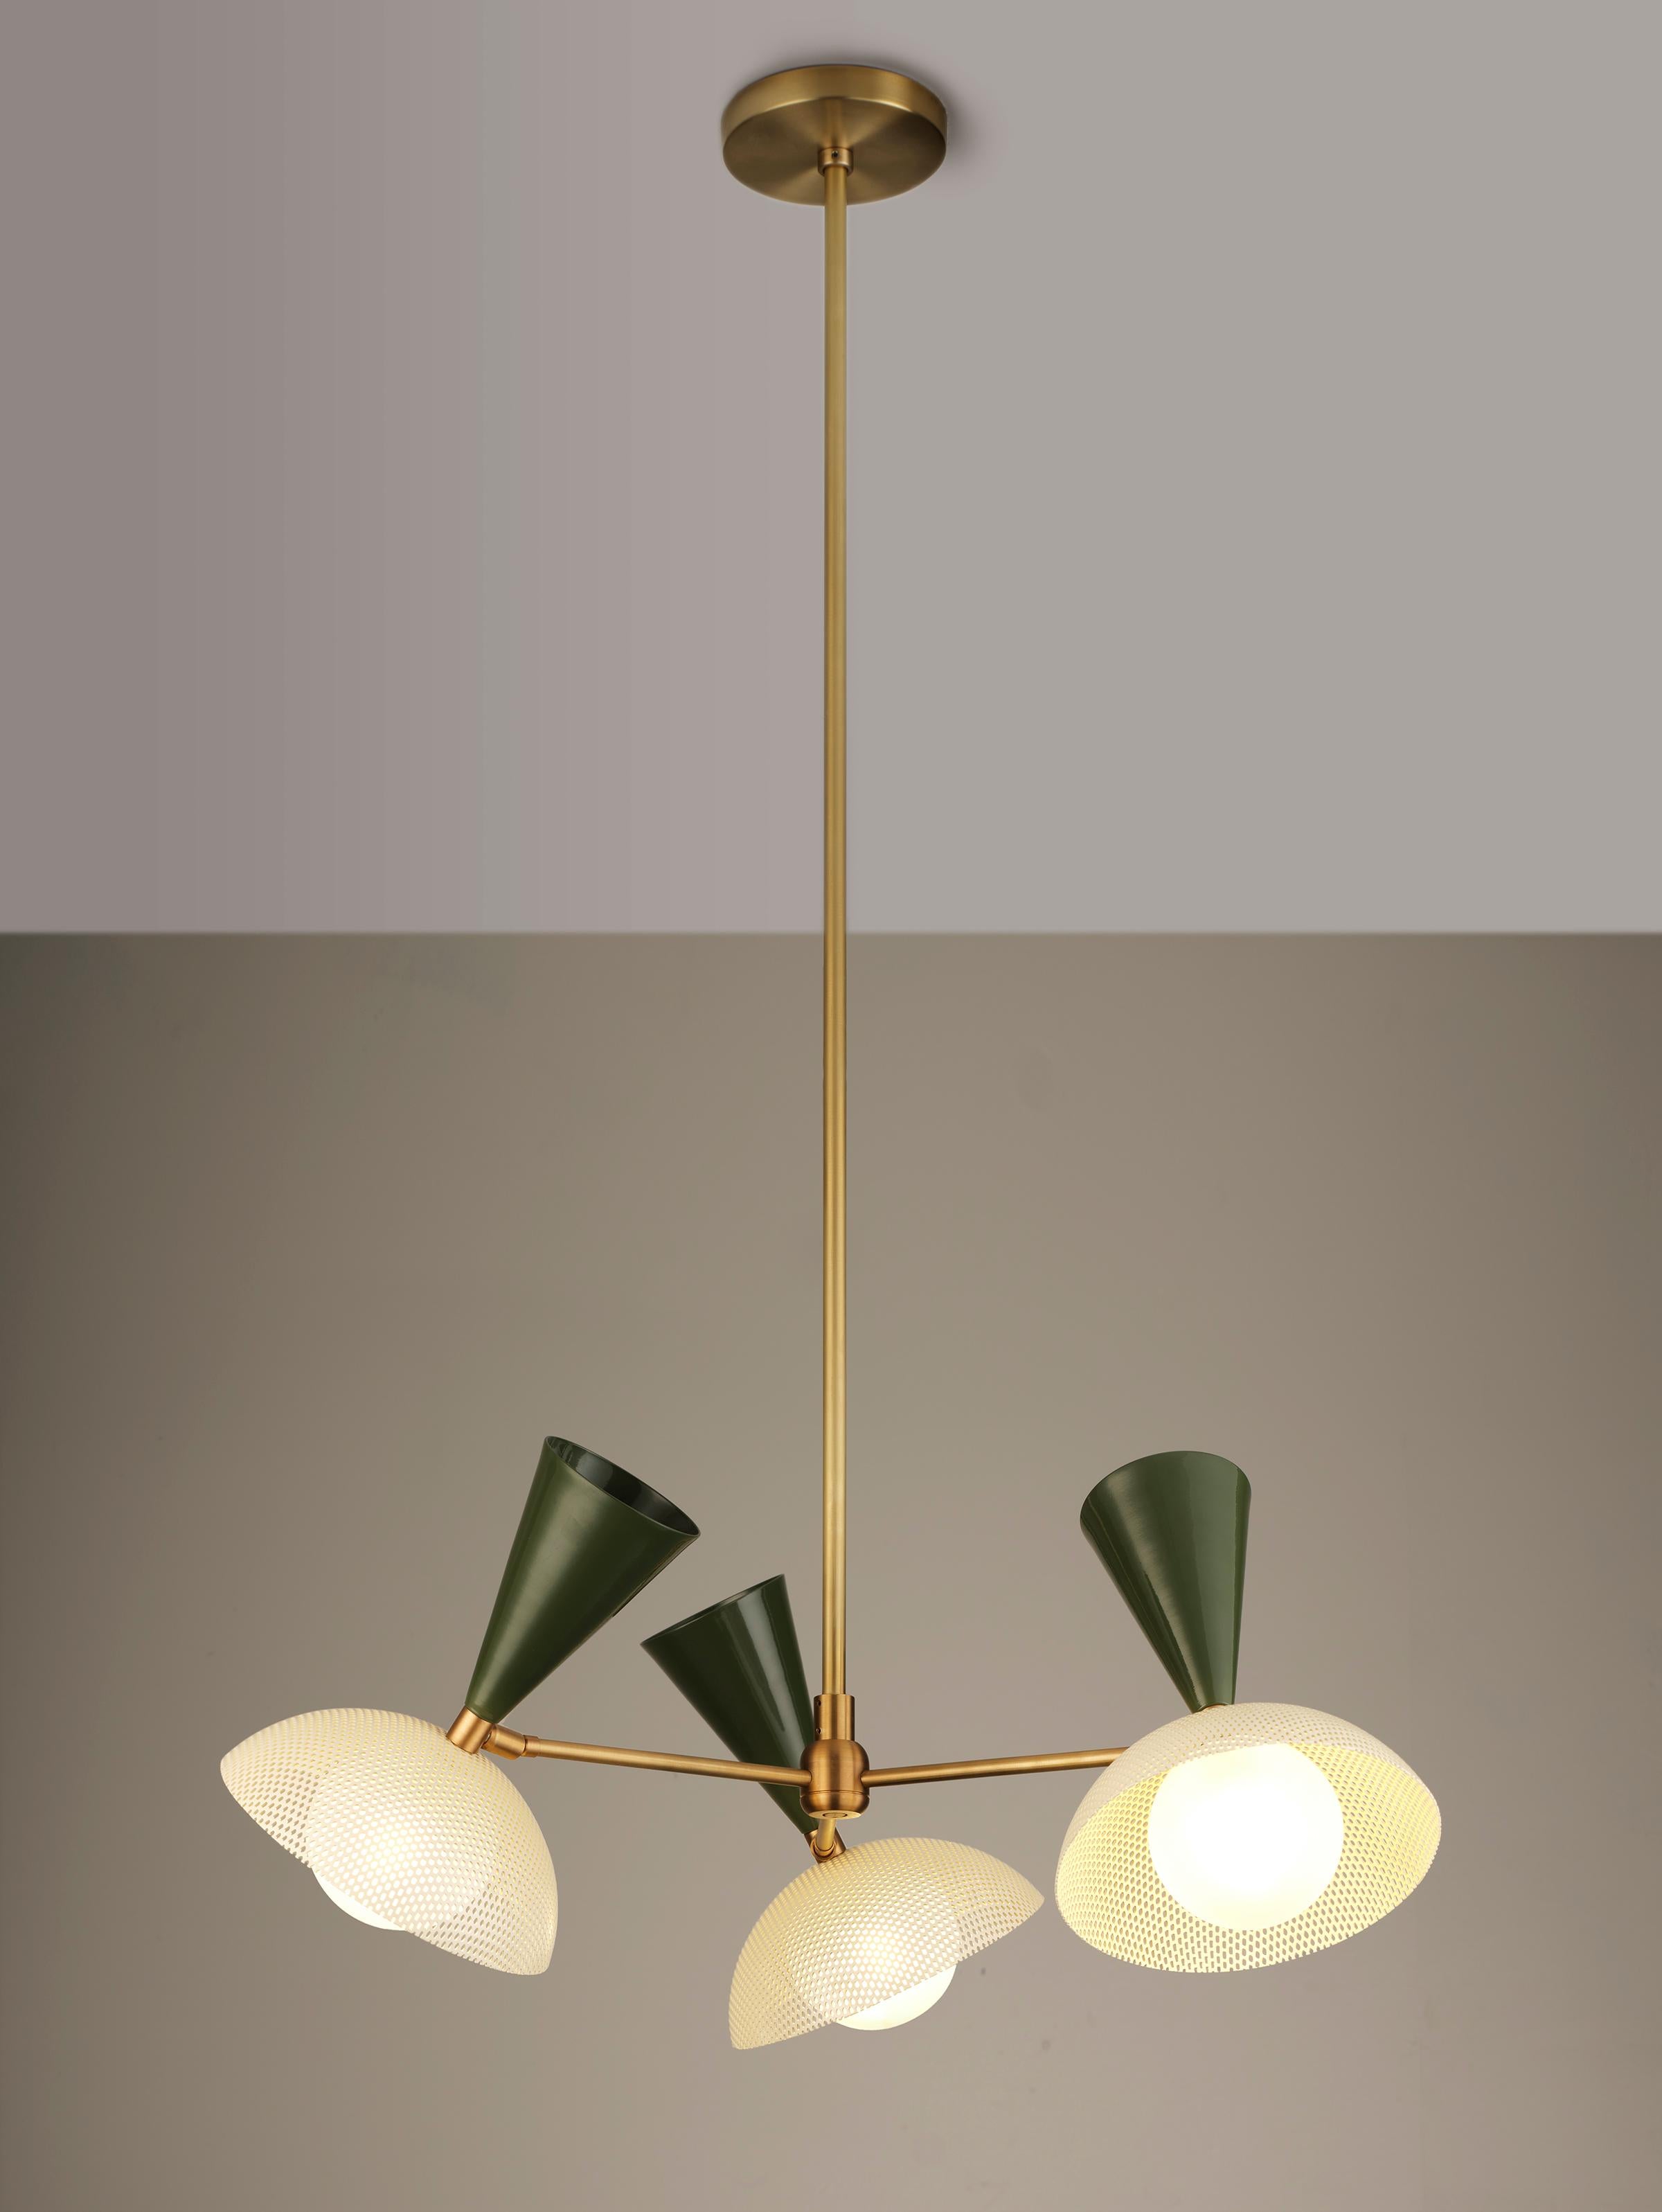 Powder-Coated Molto 3-Arm Ceiling Pendant in Natural Brass + Enameled Mesh, Blueprint Lighting For Sale